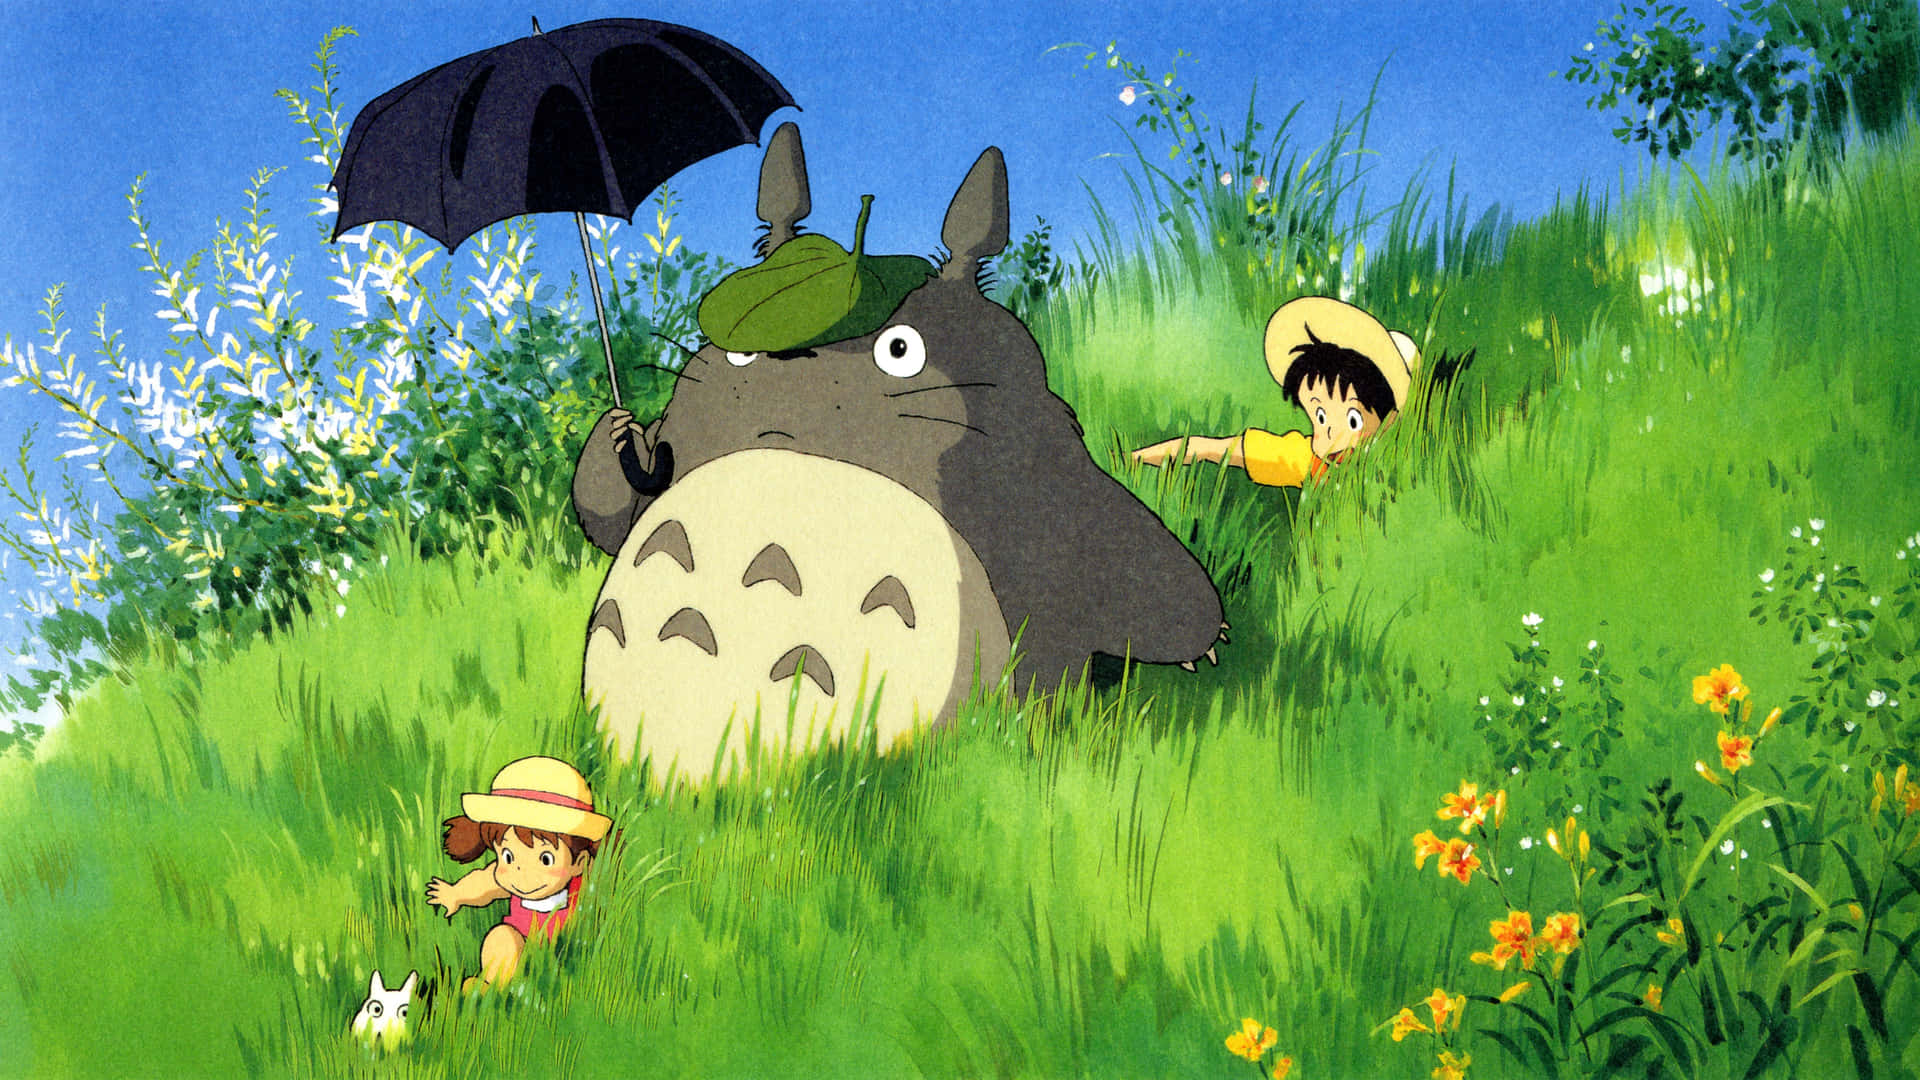 Enjoy the beauty of nature with Totoro